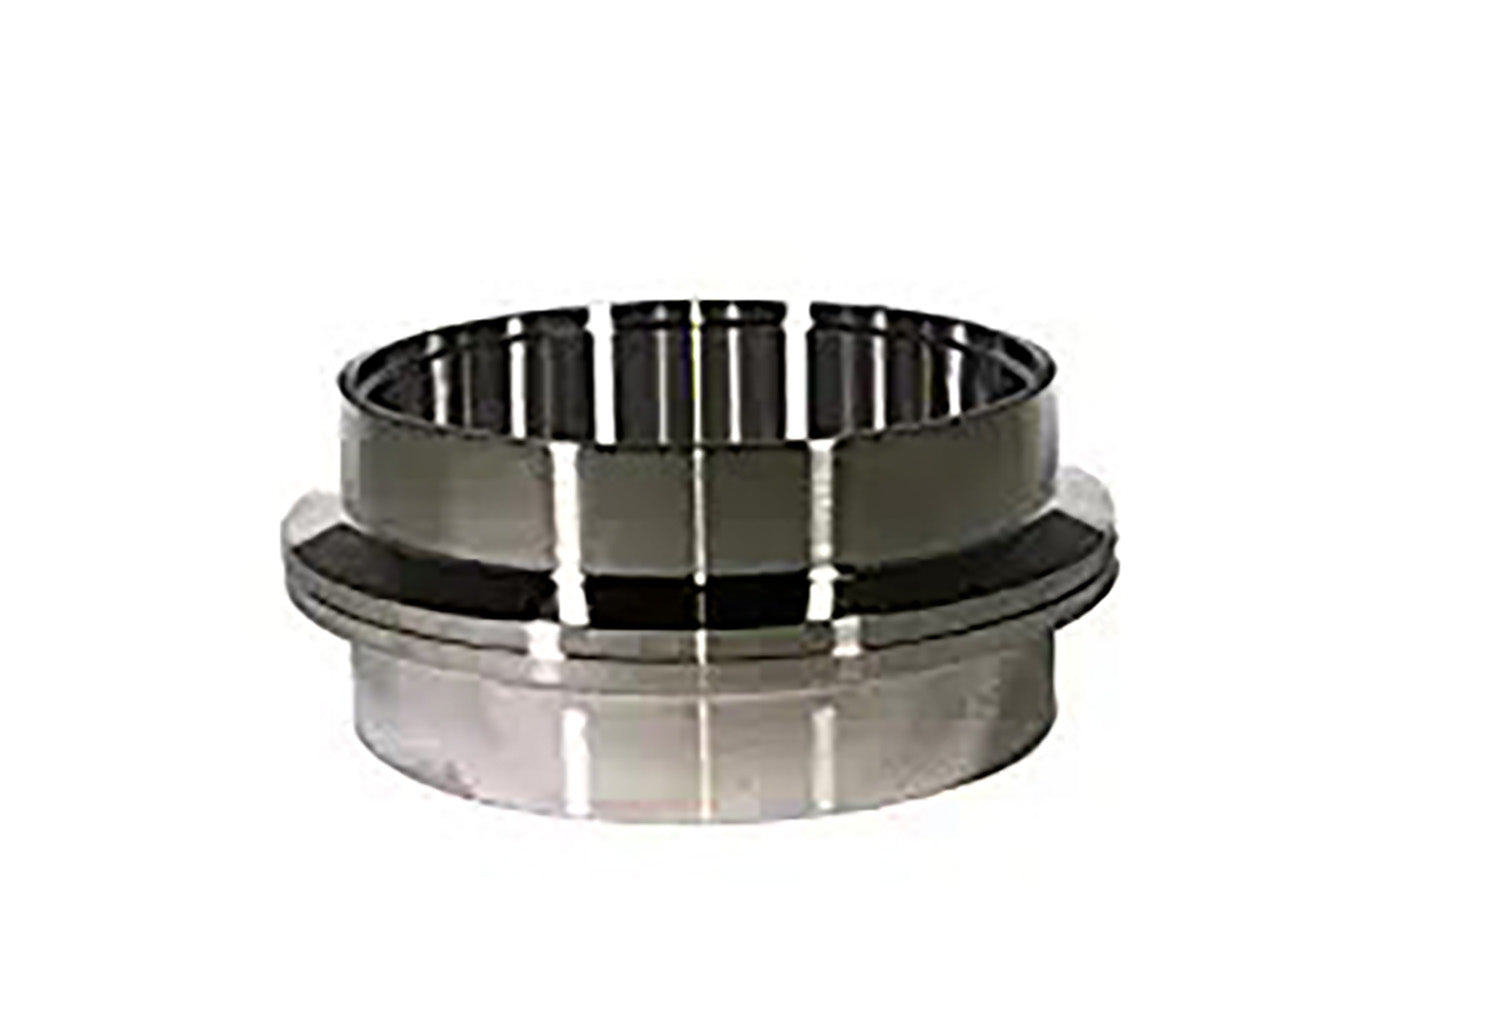 2-1/2" V-Band Flange, T304 Stainless Steel, Pair (LH + RH)